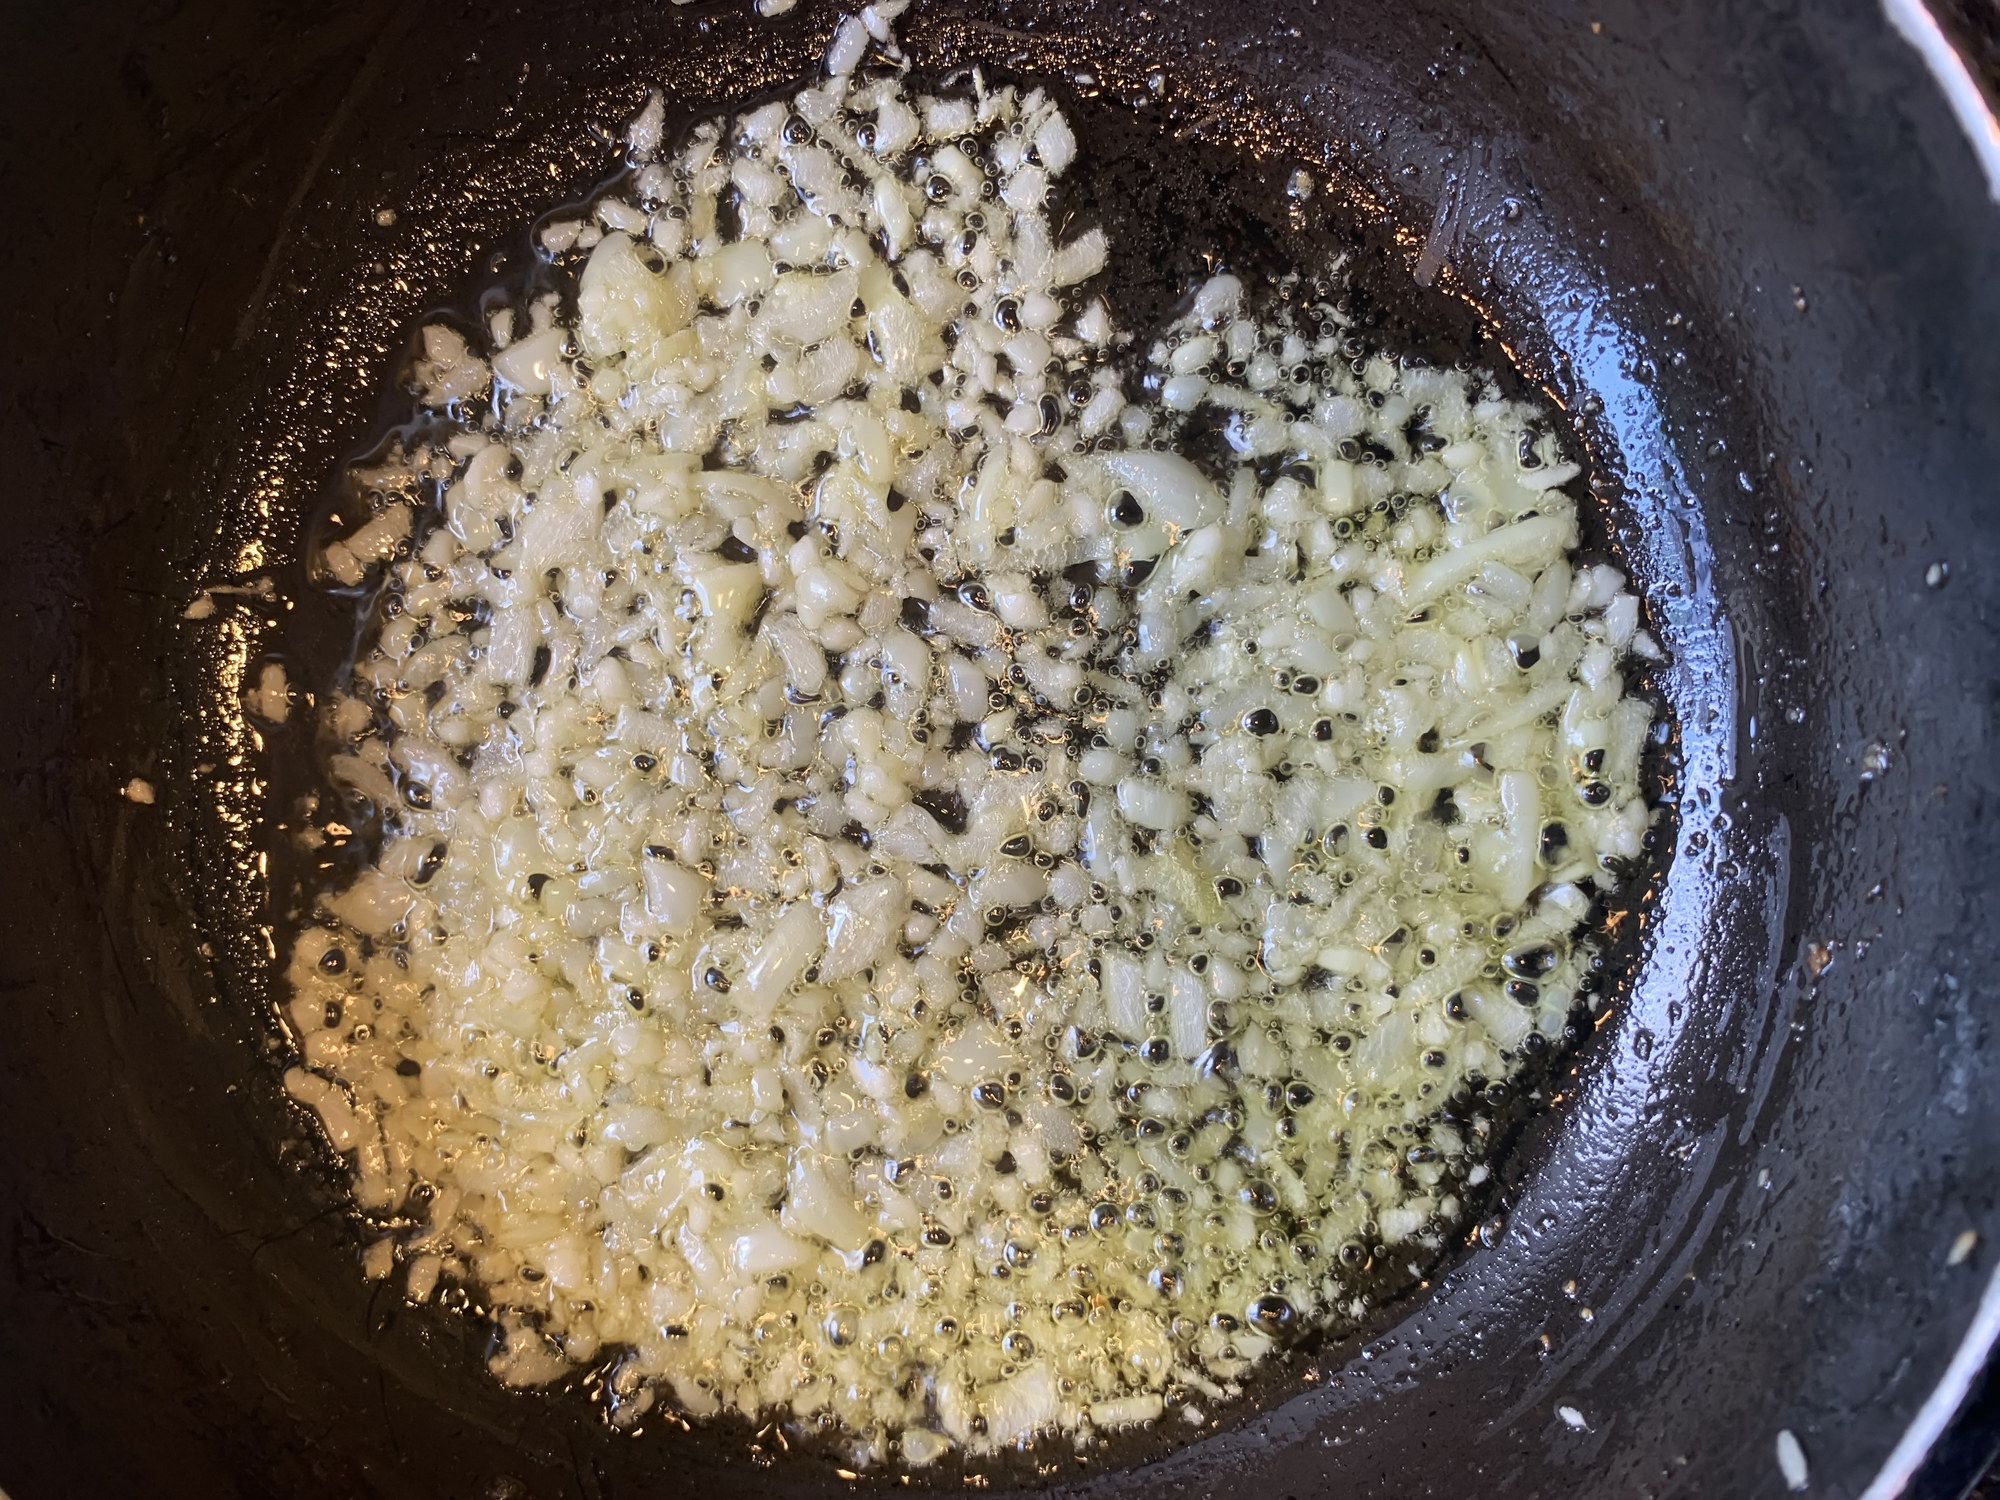 Minced garlic simmering in a pan.